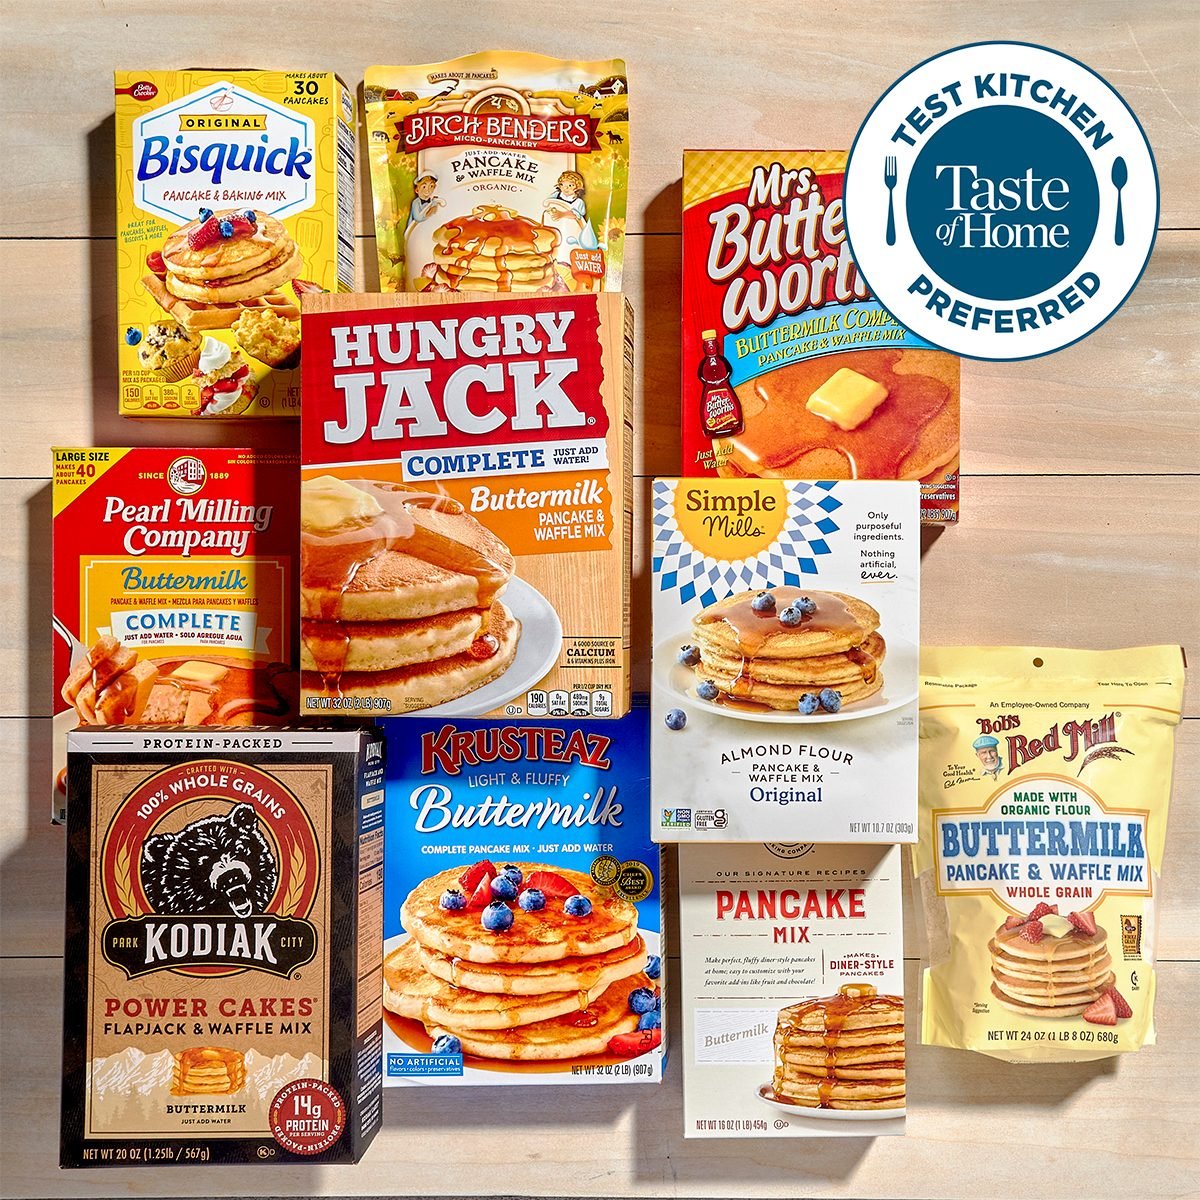 Better Brand Food Products, Inc. - Home